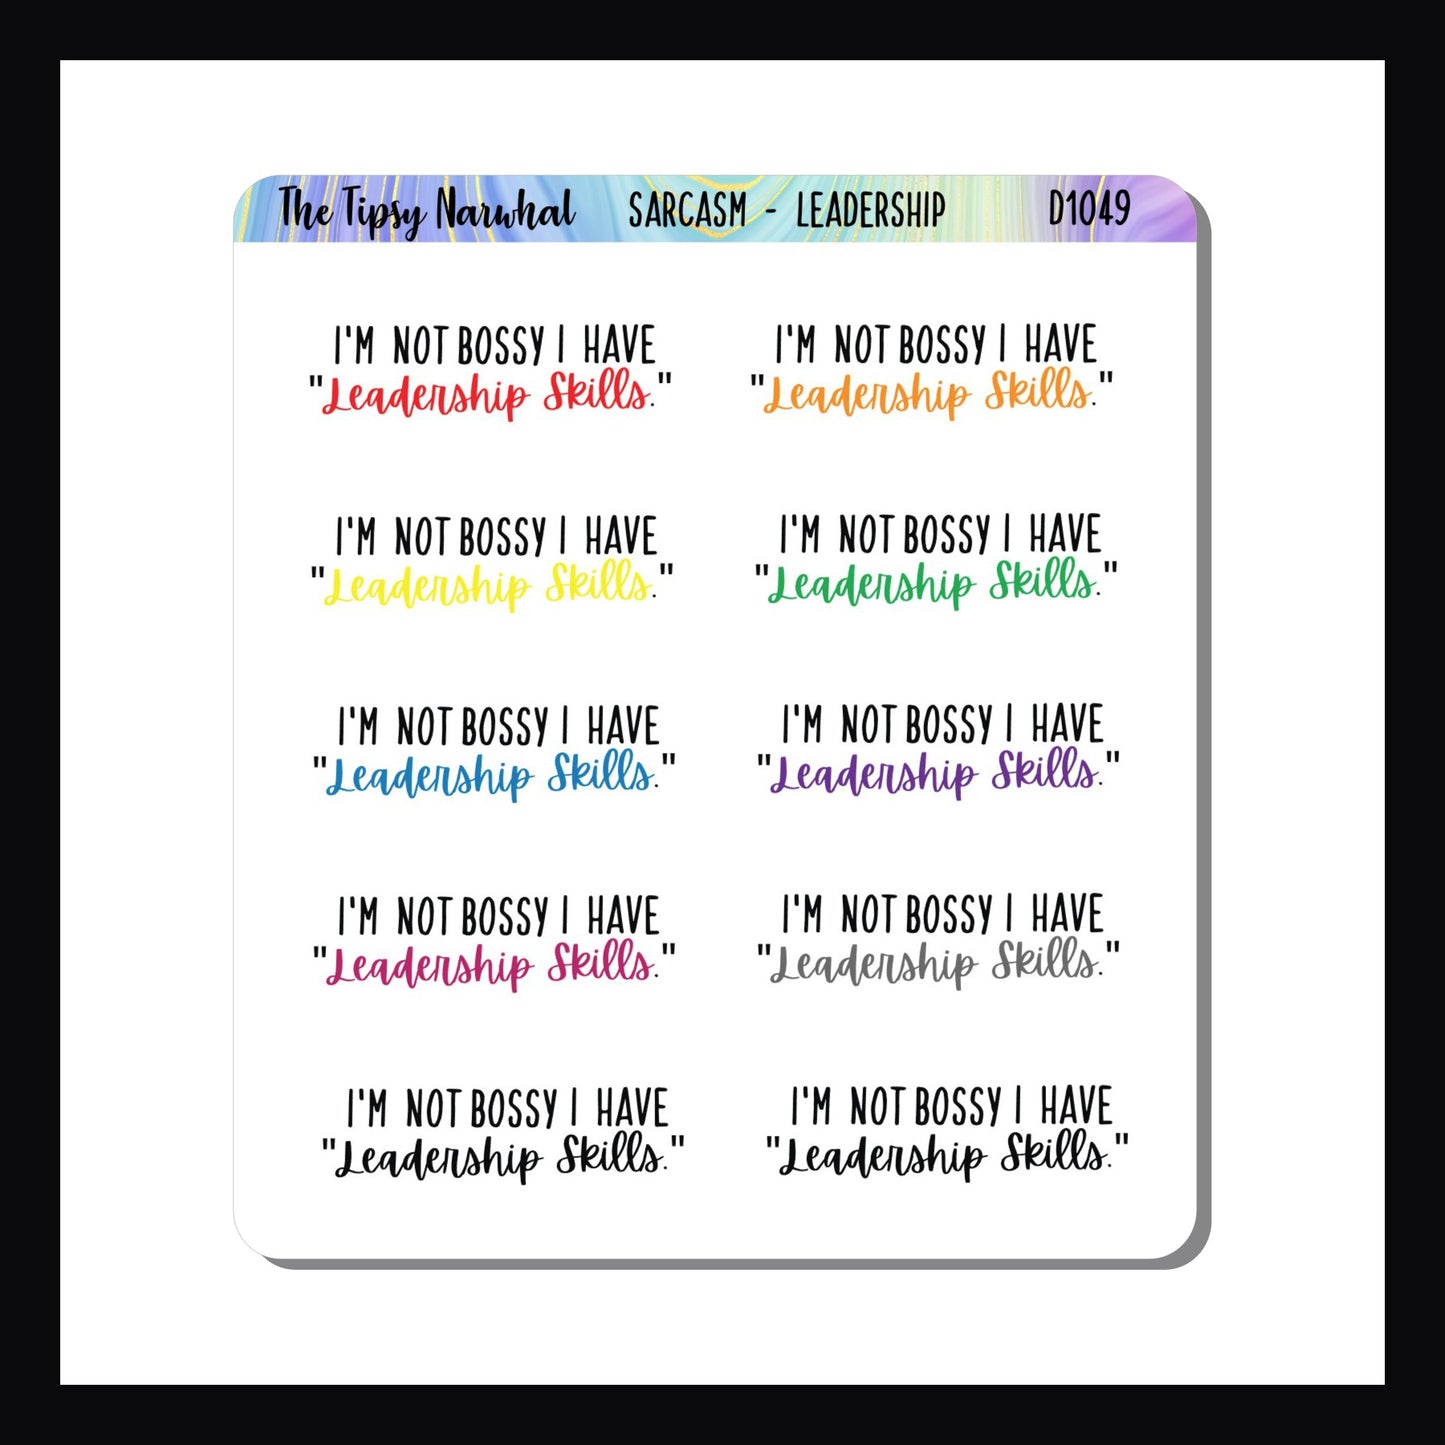 The Leadership Skills Sarcasm Sticker Sheet features 10 tongue in cheek stickers saying "Im not bossy I have leadership skills". 